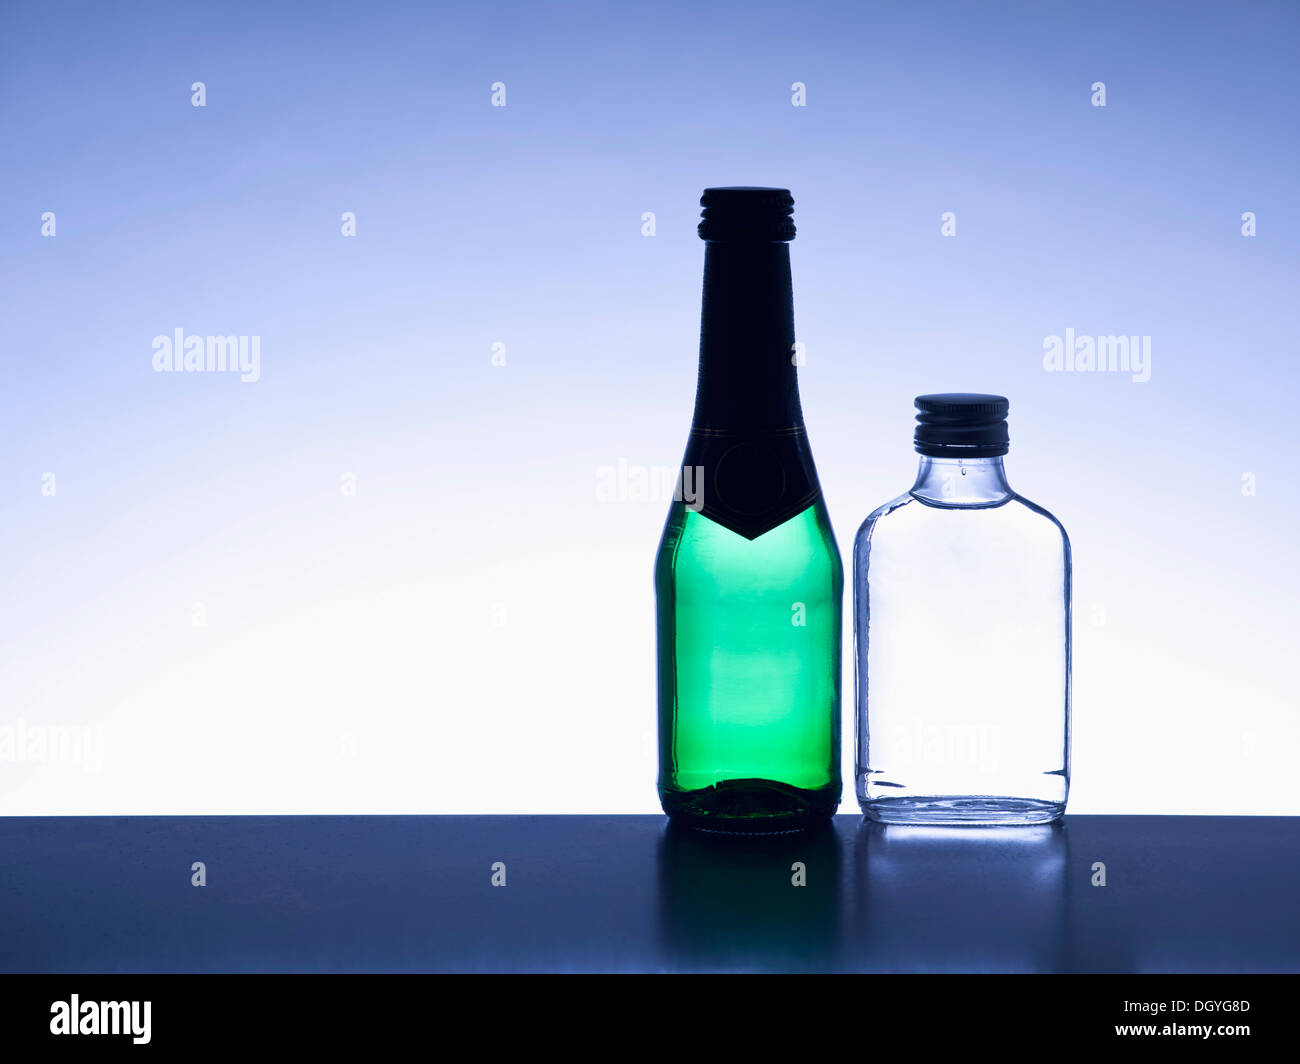 Two miniature bottles of alcohol side by side without labels, back lit Stock Photo